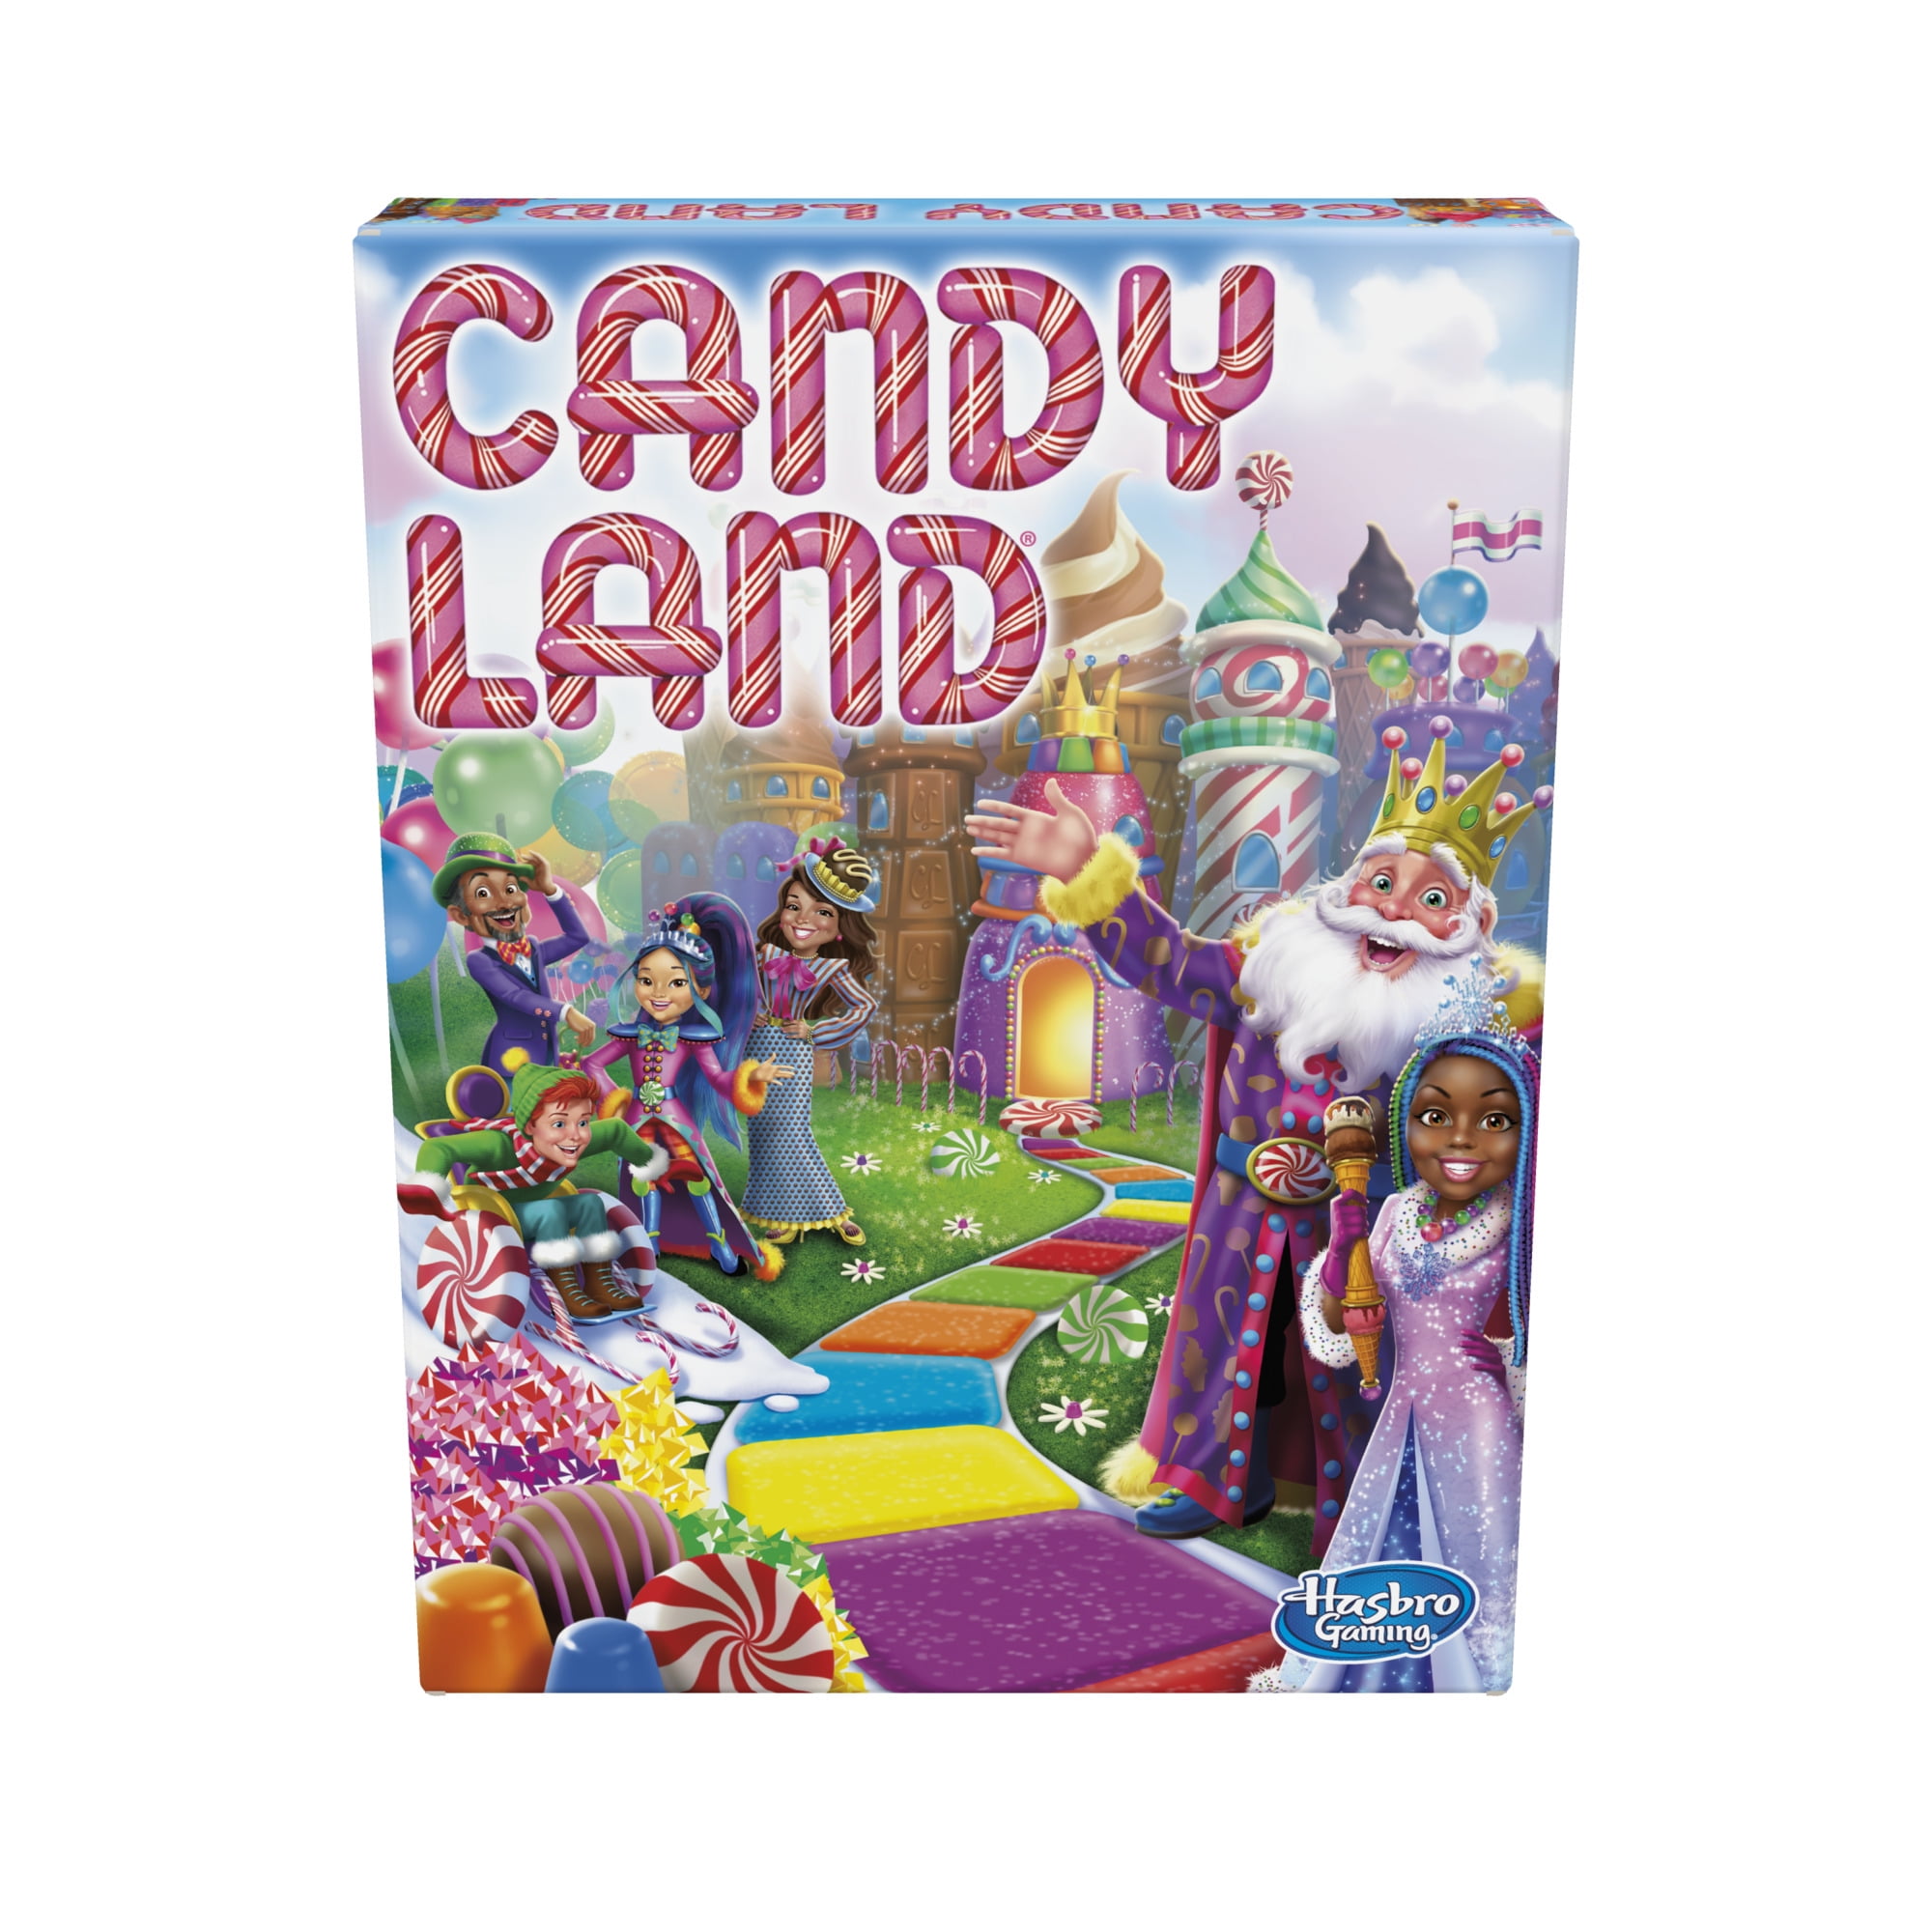 Candy Land Preschool Board Game, No Reading Required For Young Children